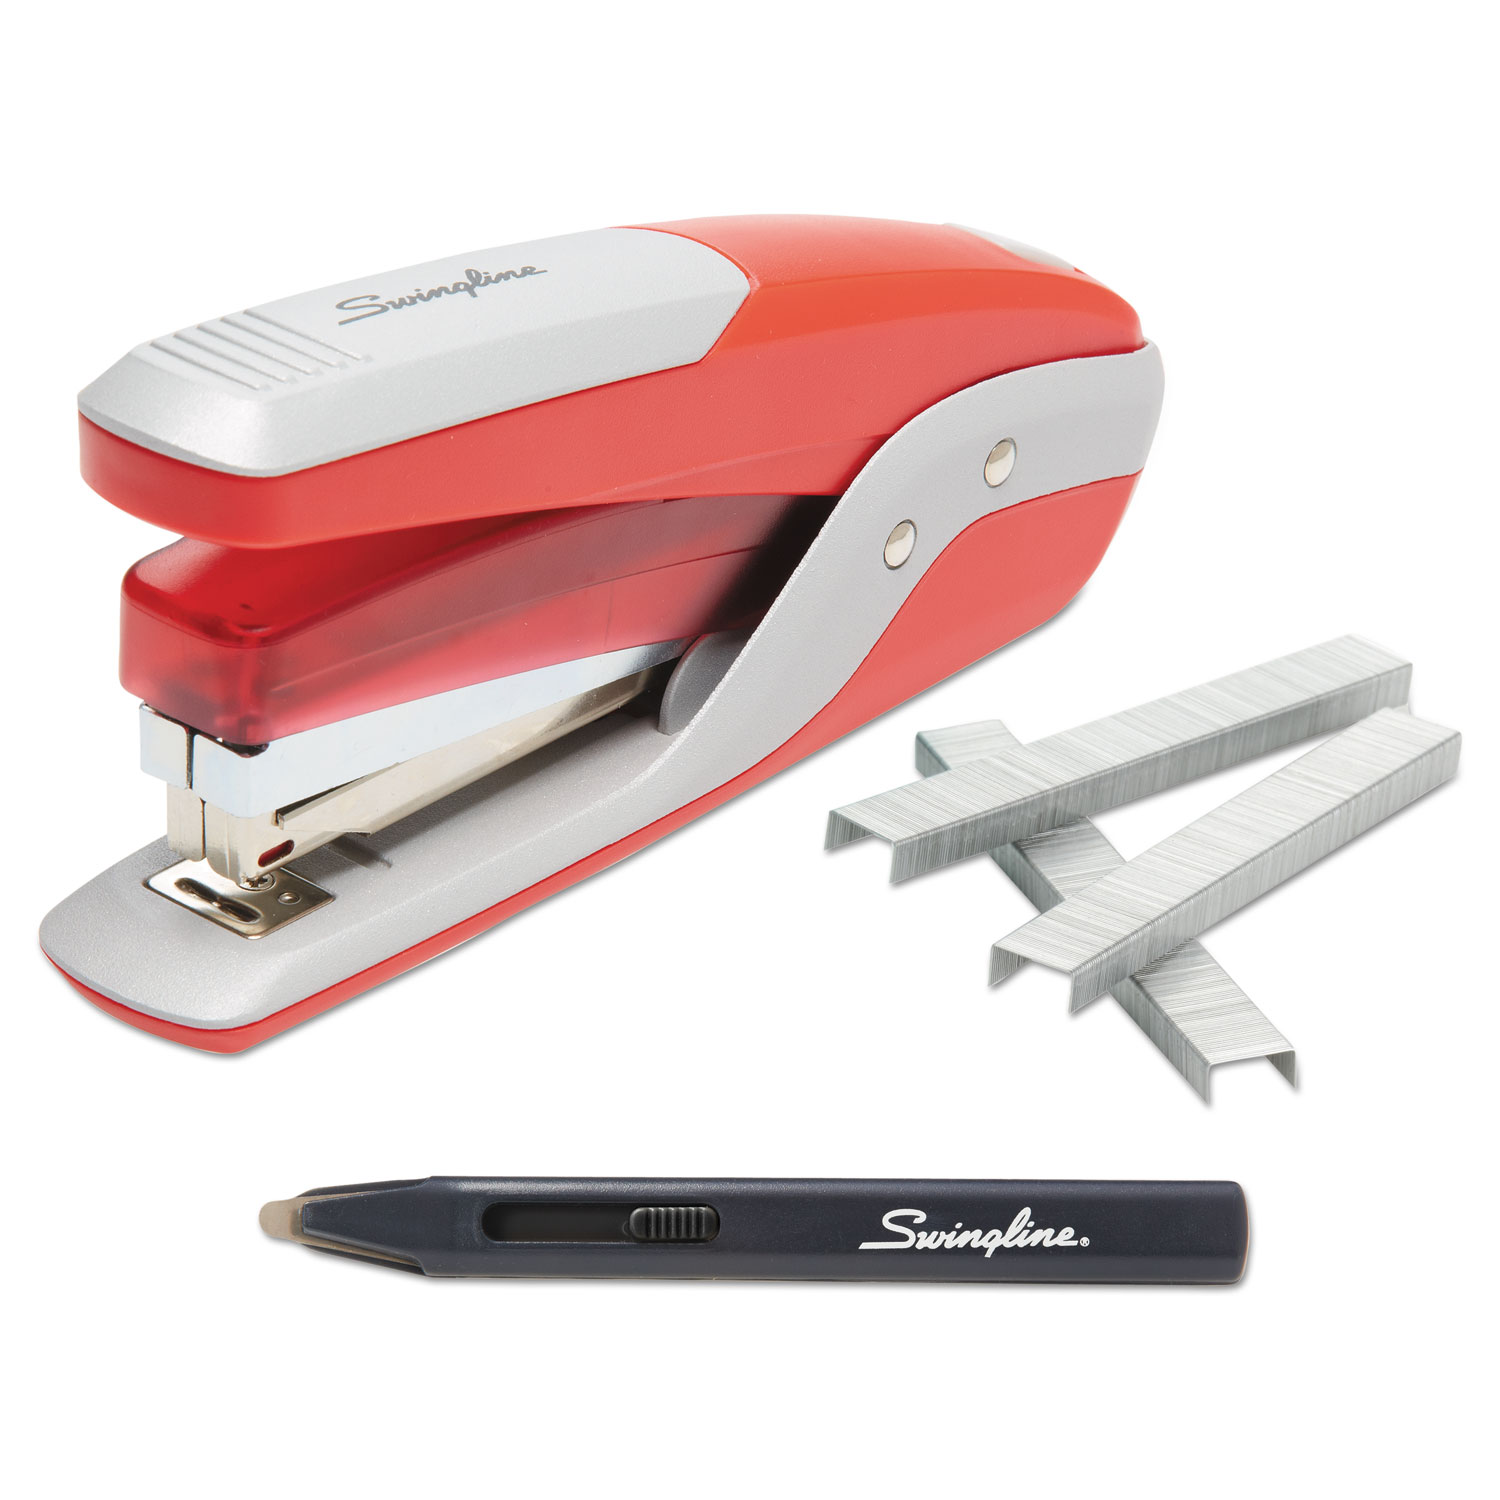  Swingline S7064589A Quick Touch Stapler Value Pack, 28-Sheet Capacity, Red/Silver (SWI64589) 